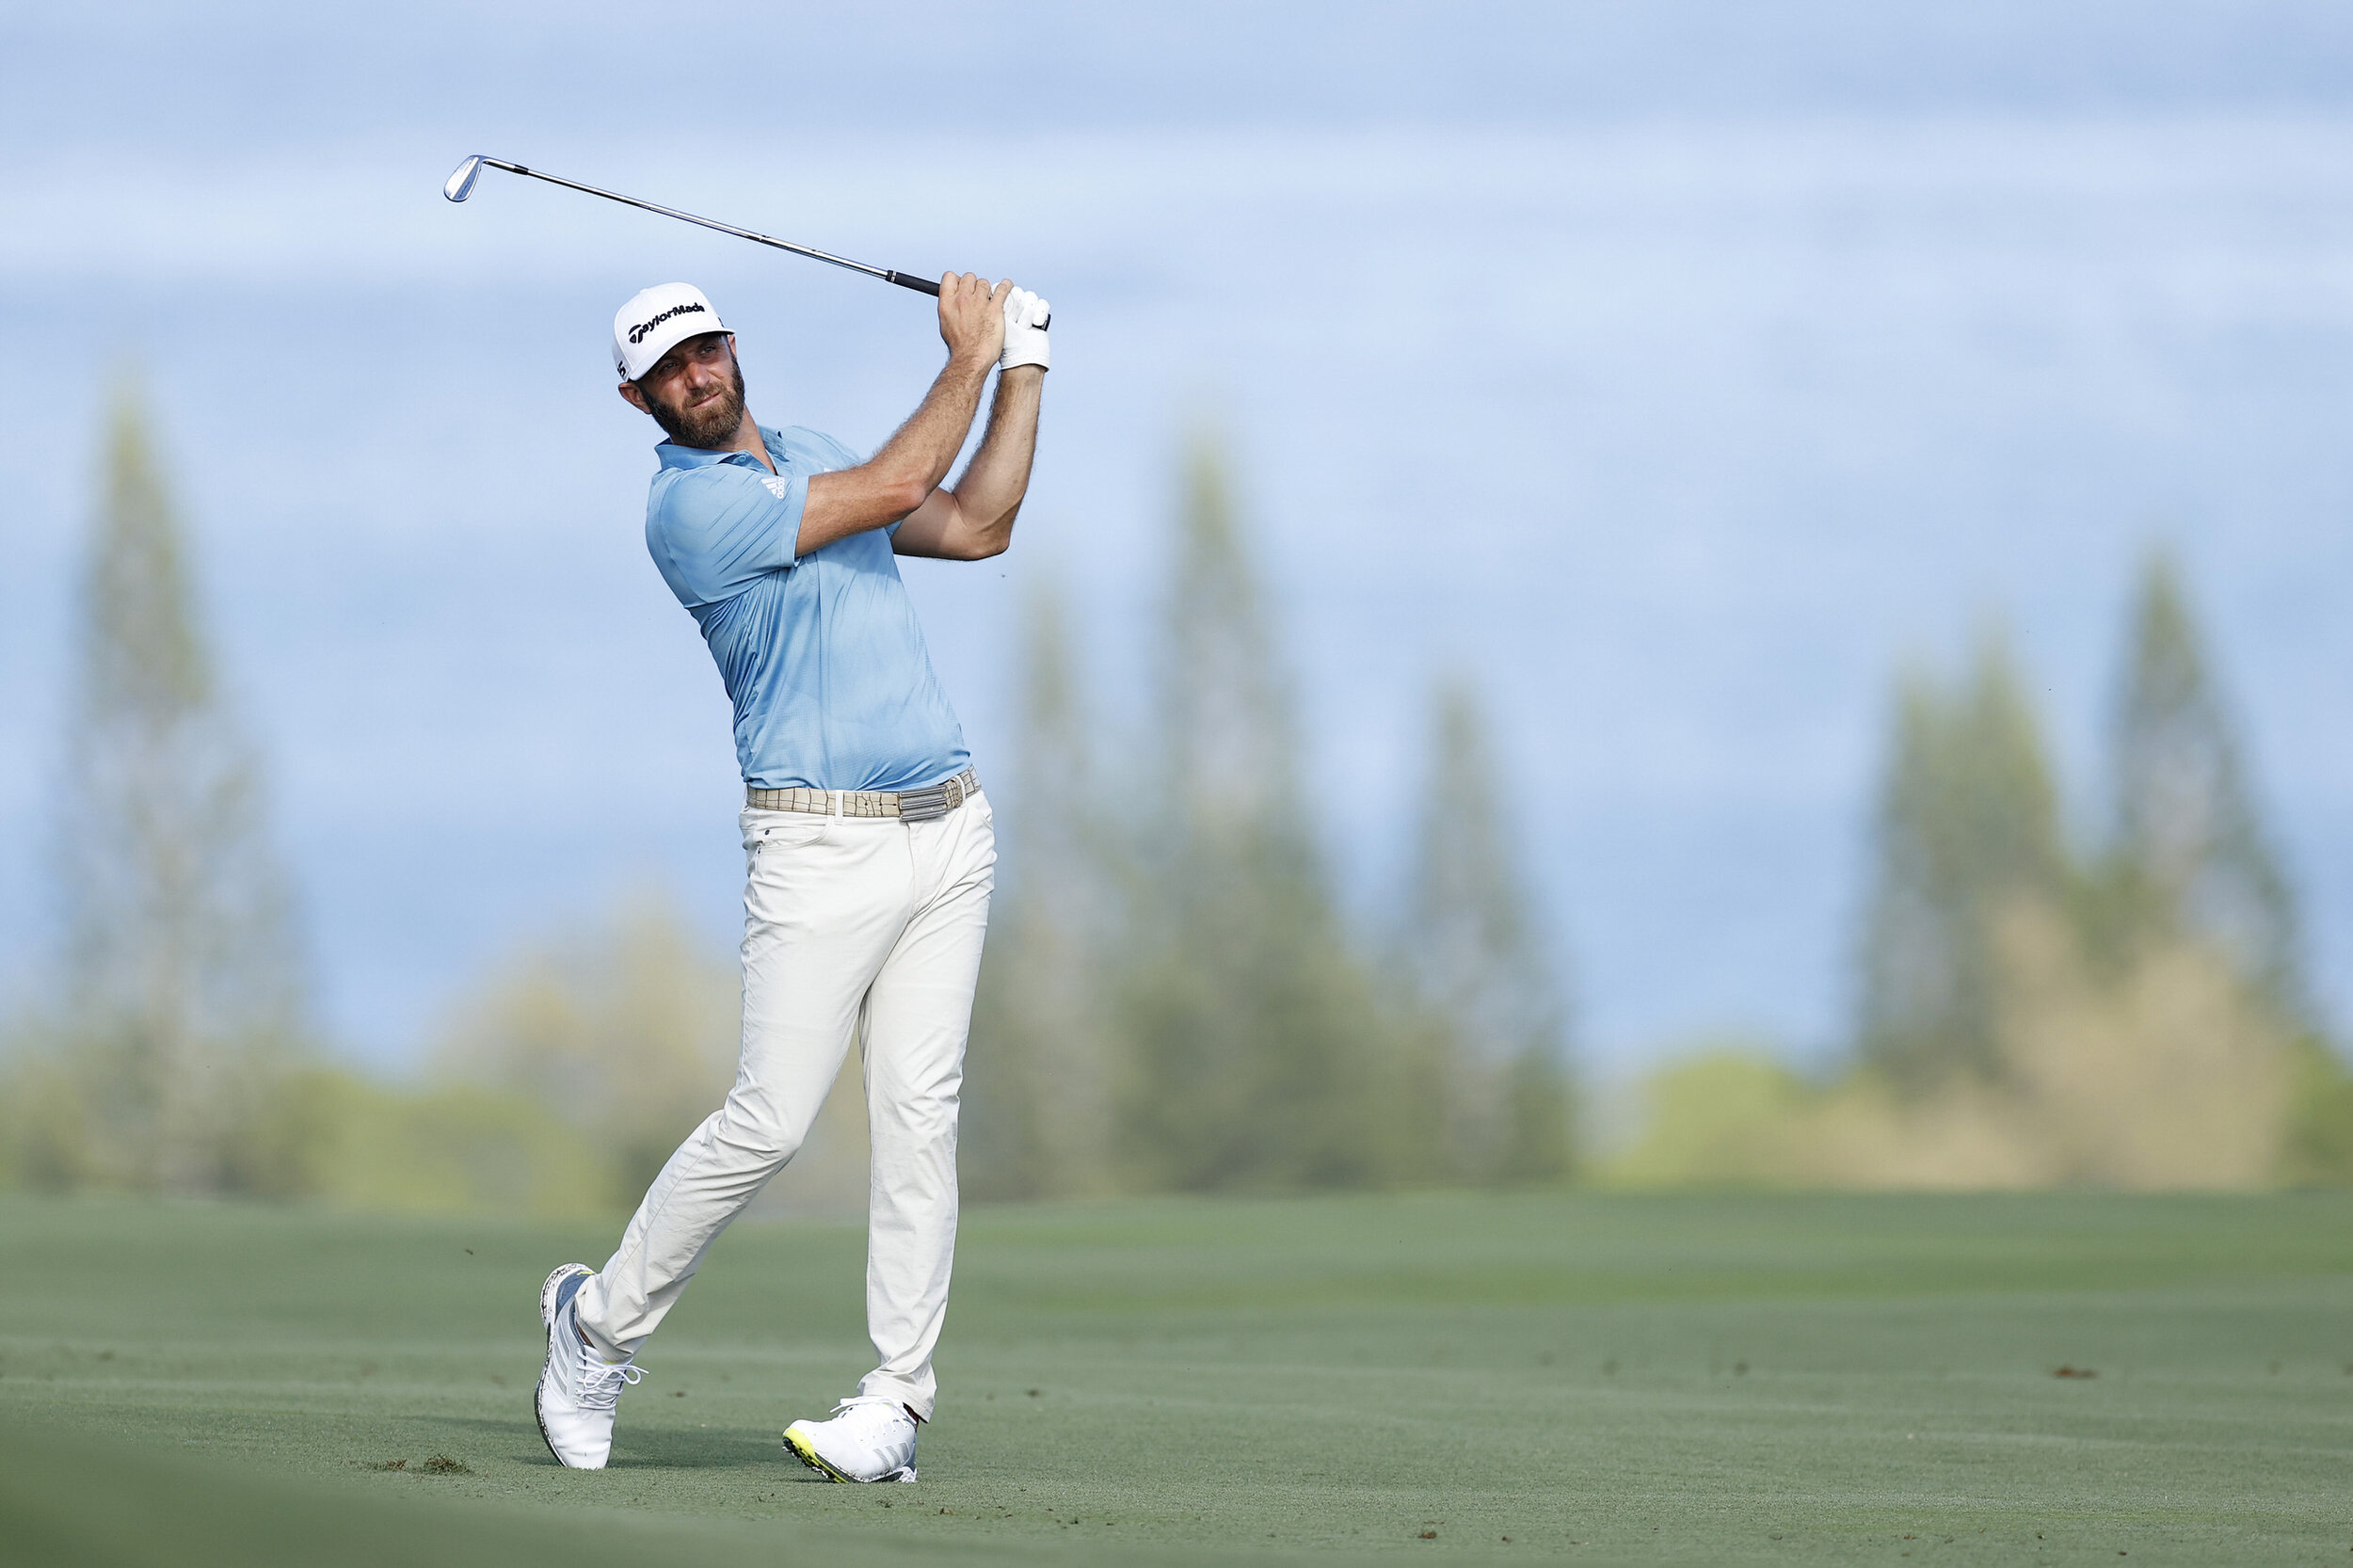  KAPALUA, HAWAII - JANUARY 08: Dustin Johnson of the United States plays a shot on the fourth hole during the second round of the Sentry Tournament Of Champions at the Kapalua Plantation Course on January 08, 2021 in Kapalua, Hawaii. (Photo by Cliff 